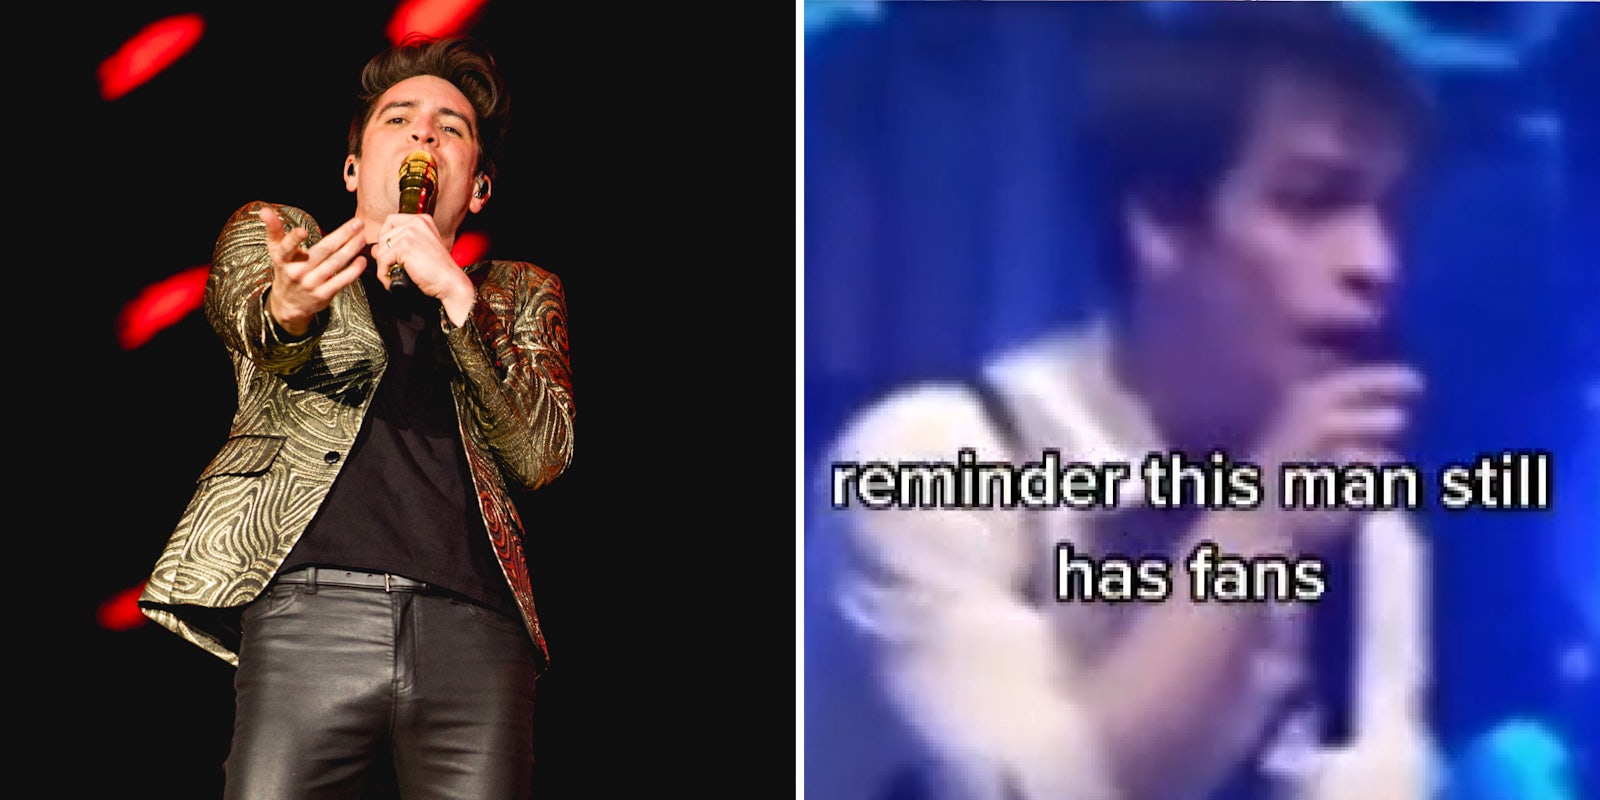 Brandon Urie Panic at the Disco preforming (l) Brandon Urie preforming caption 'reminder this man still has fans' (r)